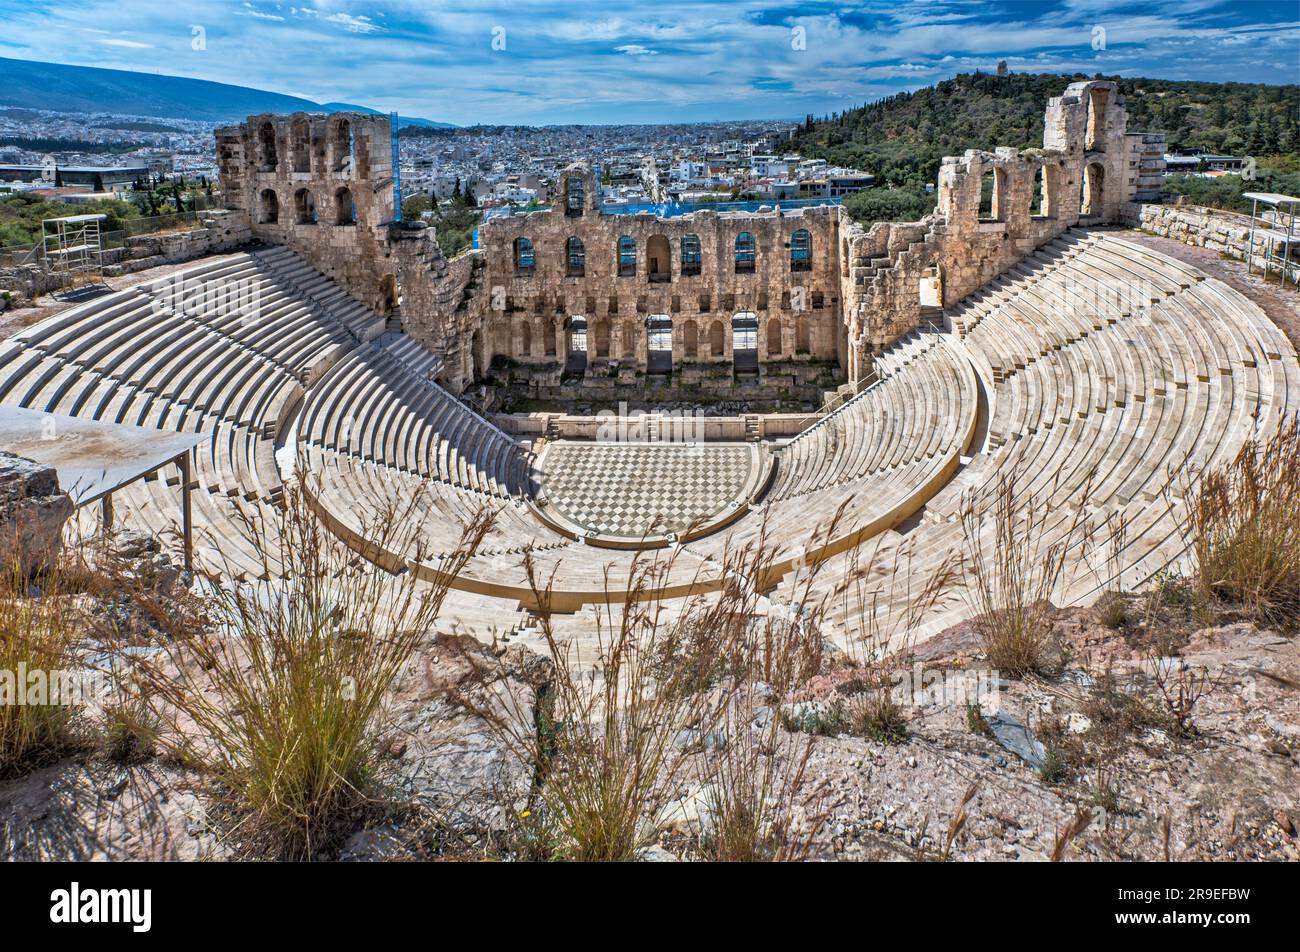 Odeon of Herodes Atticus, stone Roman theater, completed in AD 161, Acropolis of Athens, Greece Stock Photo